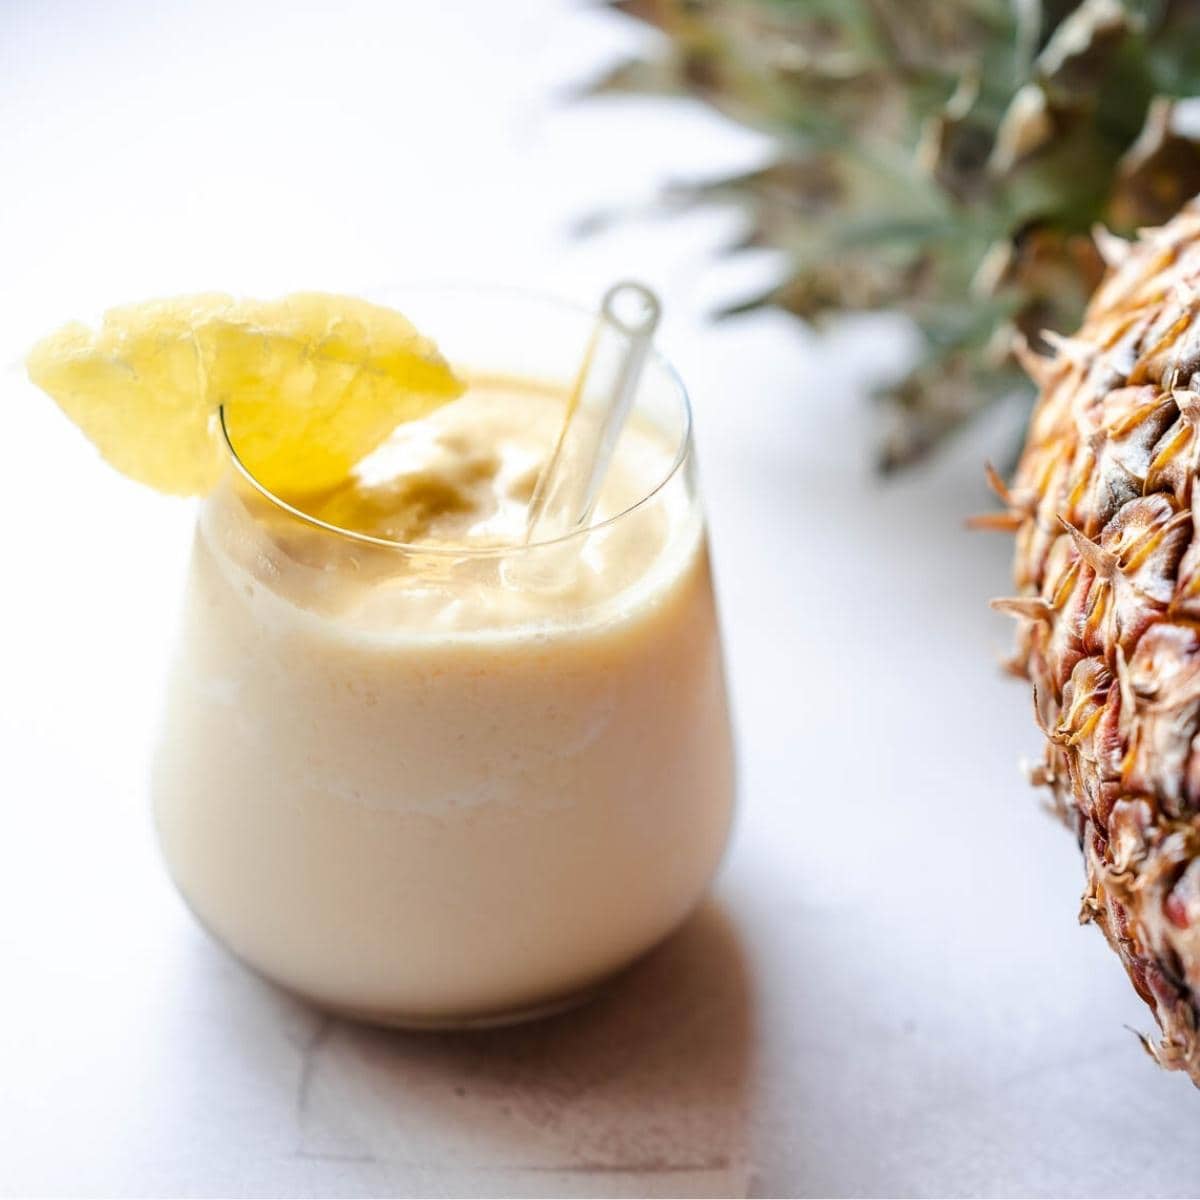 a clear glass filled with pale yellow frozen pineapple smoothie garnished with dried pineapple ring and a glass straw